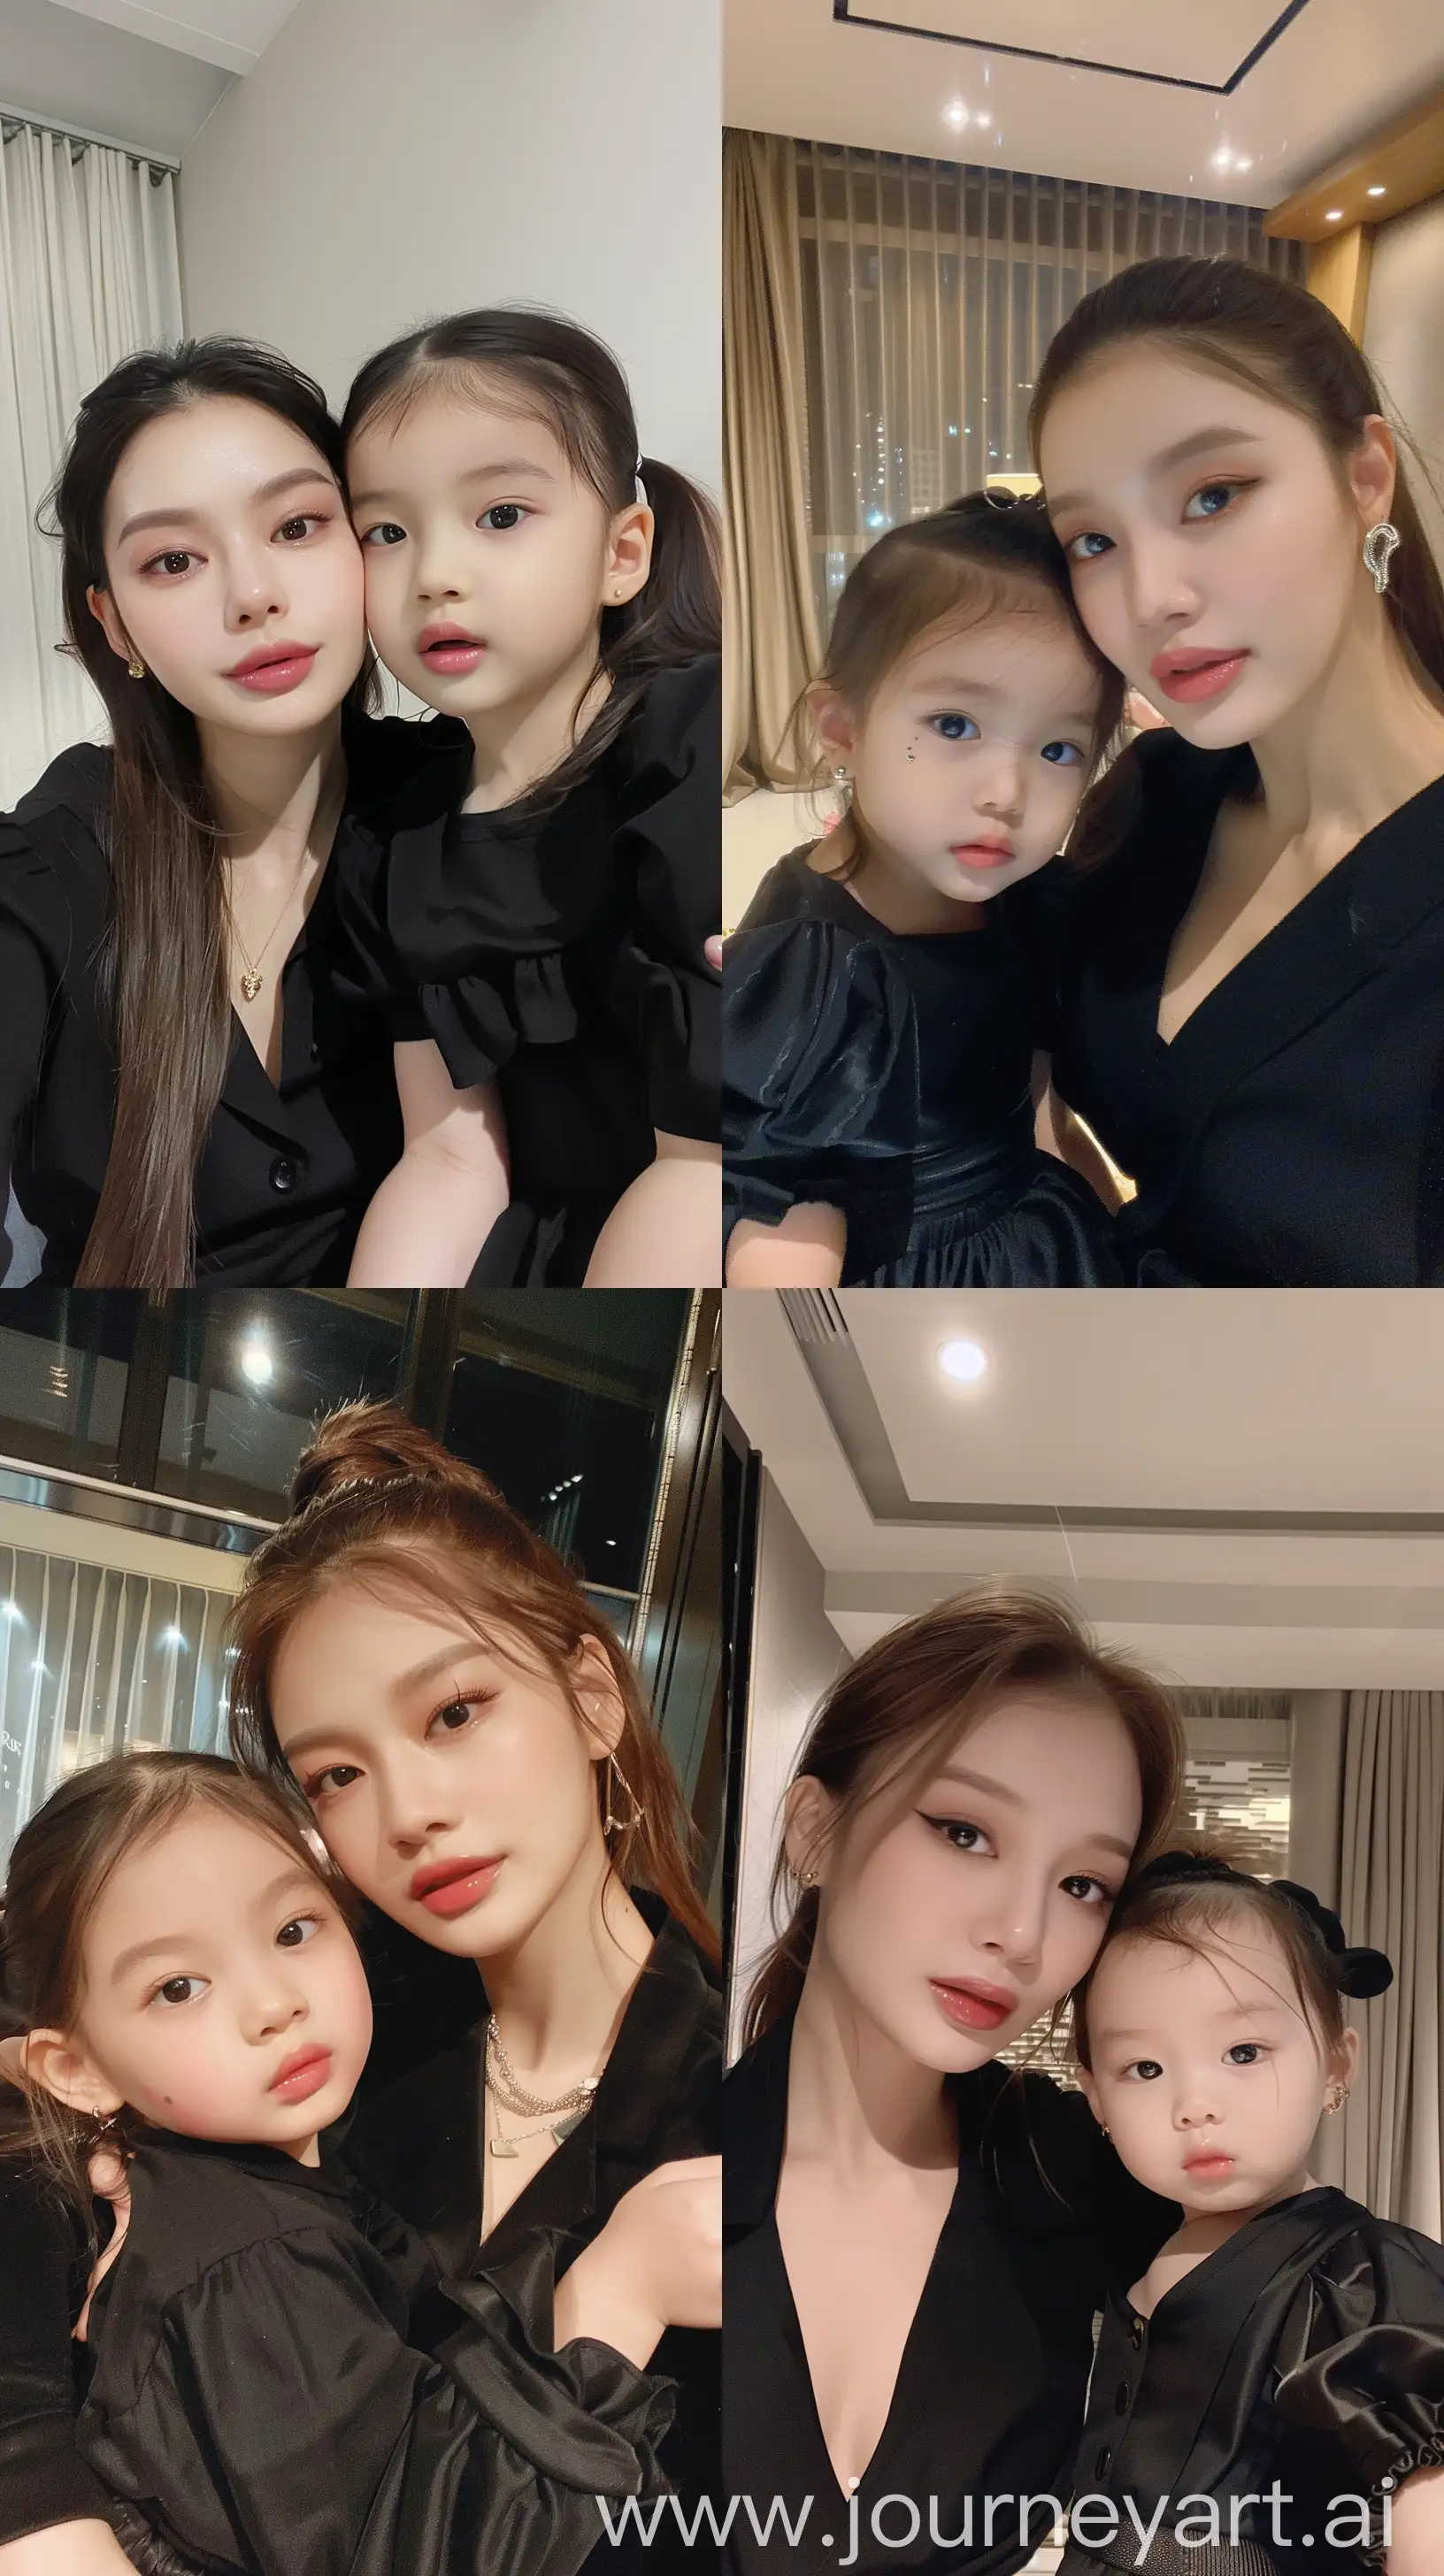 blackpink's jennie selfie with 2 years old  girl, facial feature look a like blackpink's jennie, aestethic selfie, wearing black outfit, night times, aestethic make up,hotly elegant young mom --ar 9:16 